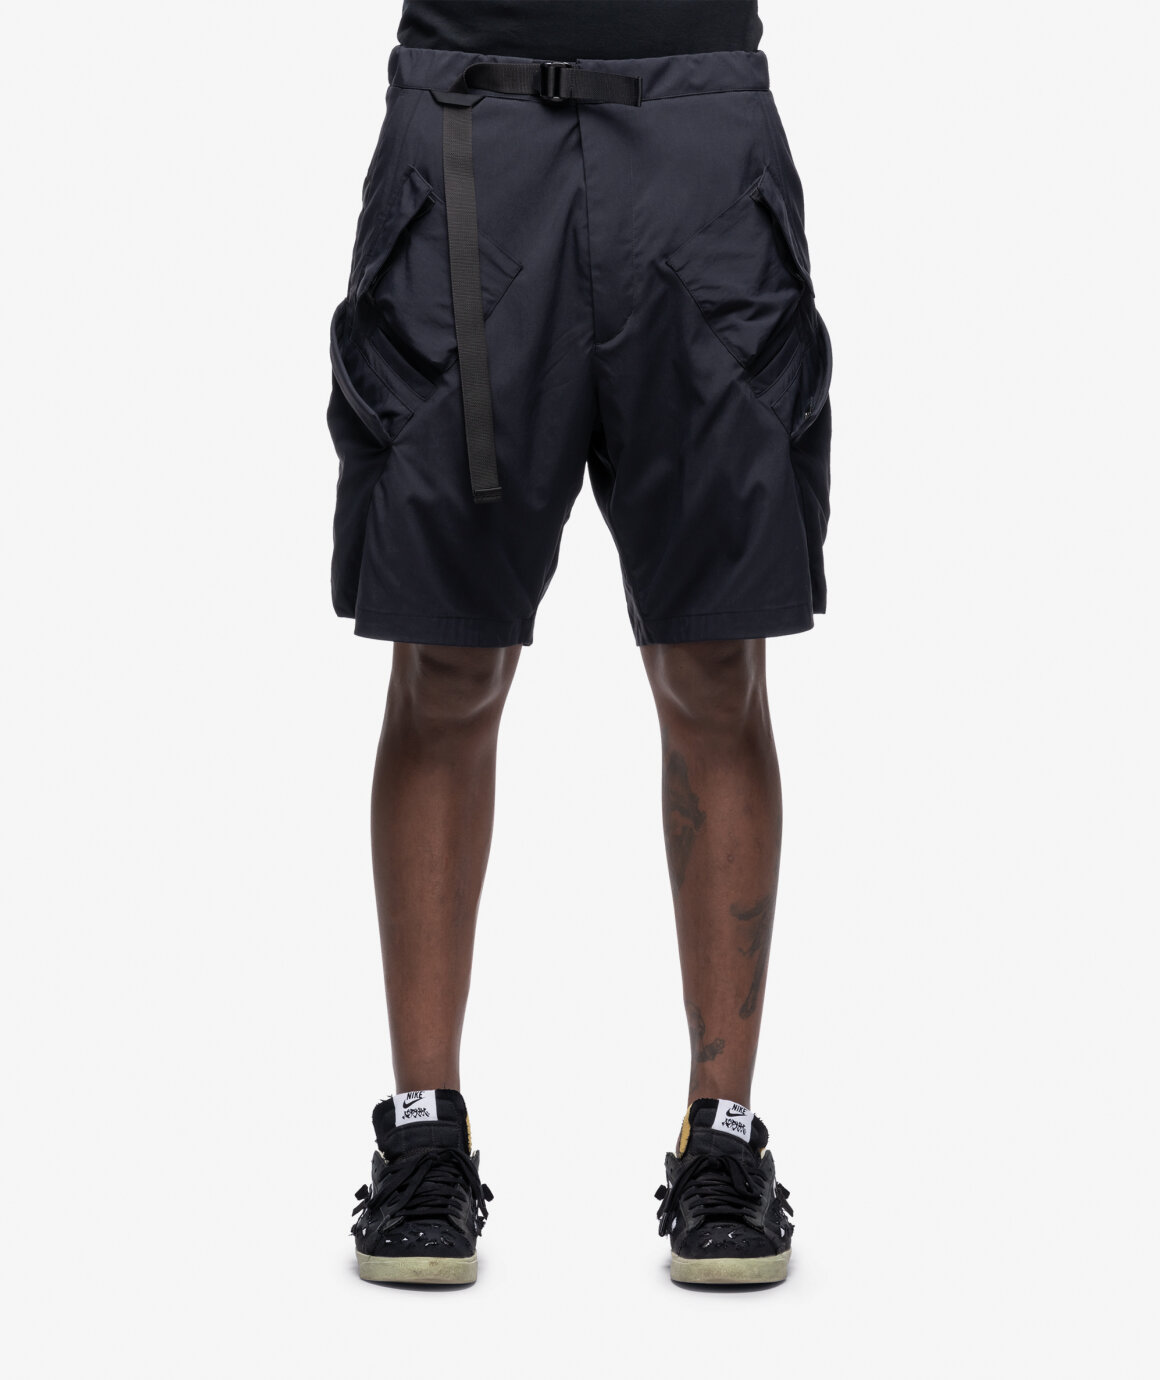 Norse Store | Shipping Worldwide - Acronym SP29-M - Black